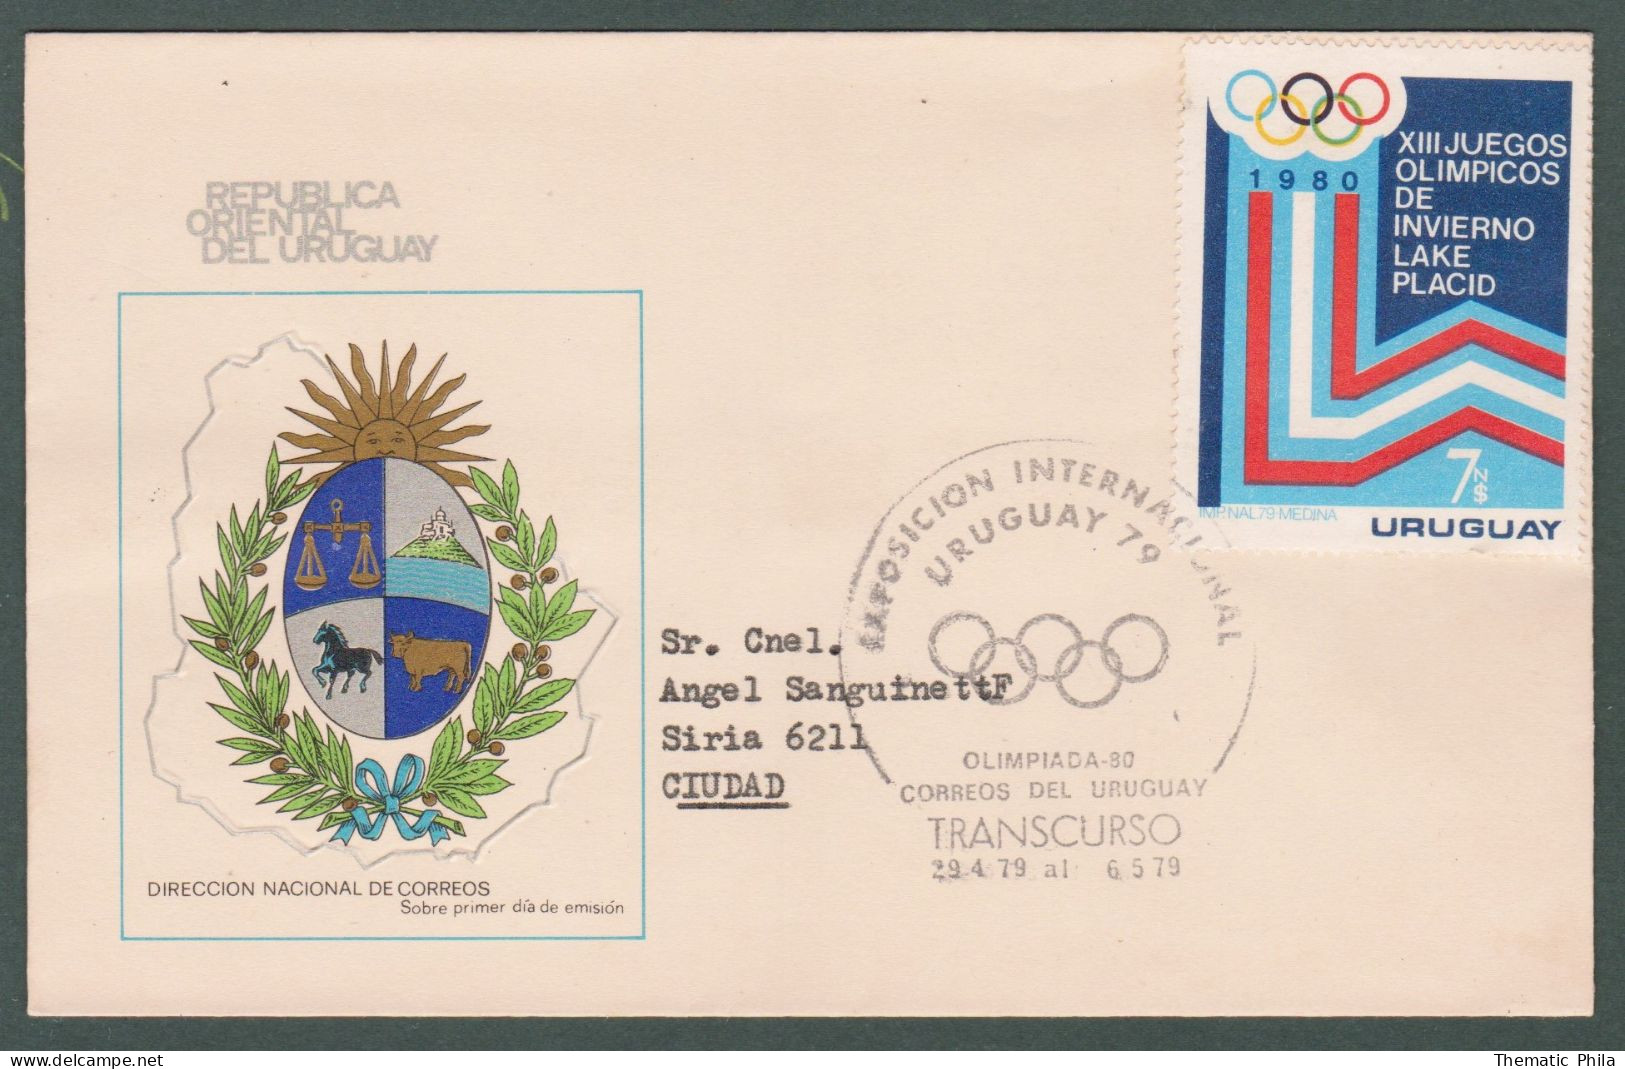 1979 URUGUAY Special Postmark Transcurso Expo International Olympic Games -Comité International Olympique - Winter 1980: Lake Placid